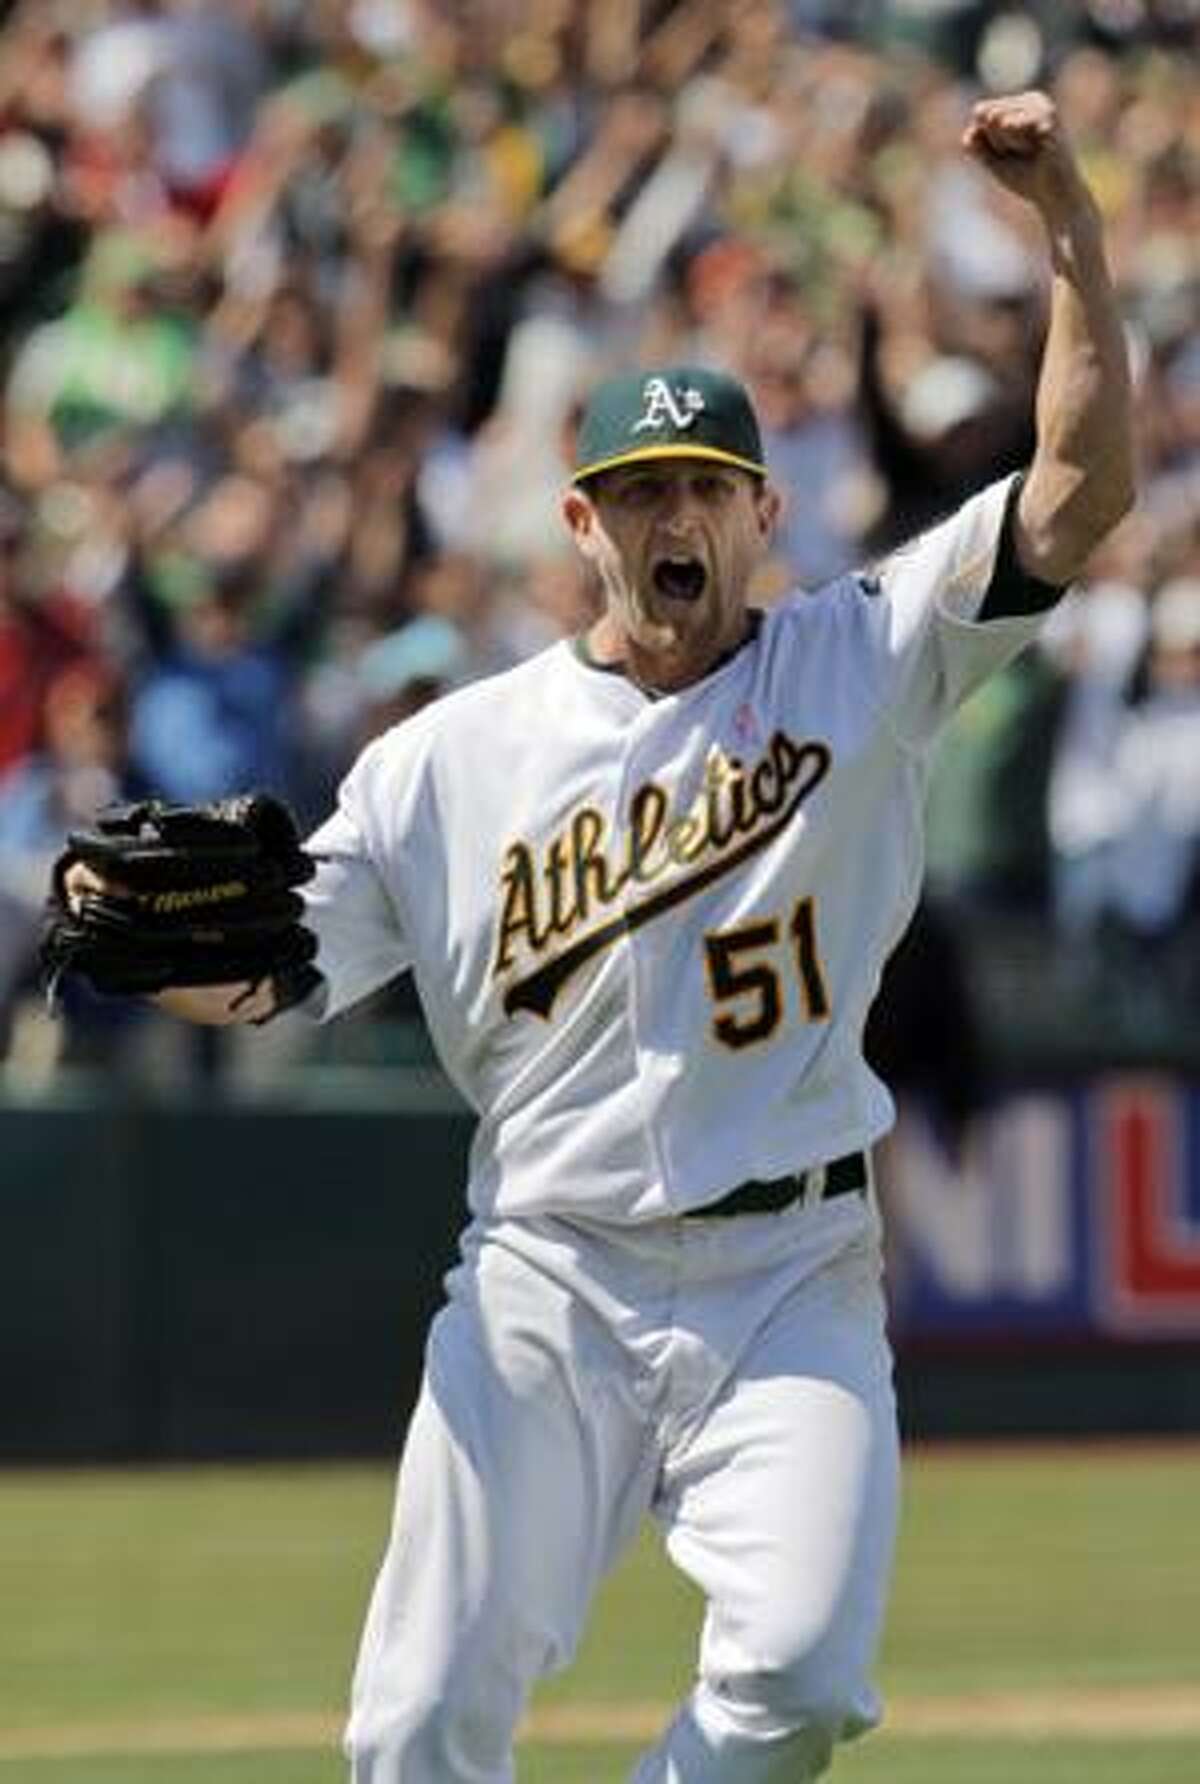 AP Photo/San Francisco Chronicle, Carlos Avila Gonzalez Oakland Athletics starting pitcher Dallas Braden celebrates throwing a perfect game against the Tampa Bay Rays during a baseball game in Oakland, Calif., Sunday. Braden pitched the 19th perfect game in major league history, a dazzling performance for the Athletics in a 4-0 victory.